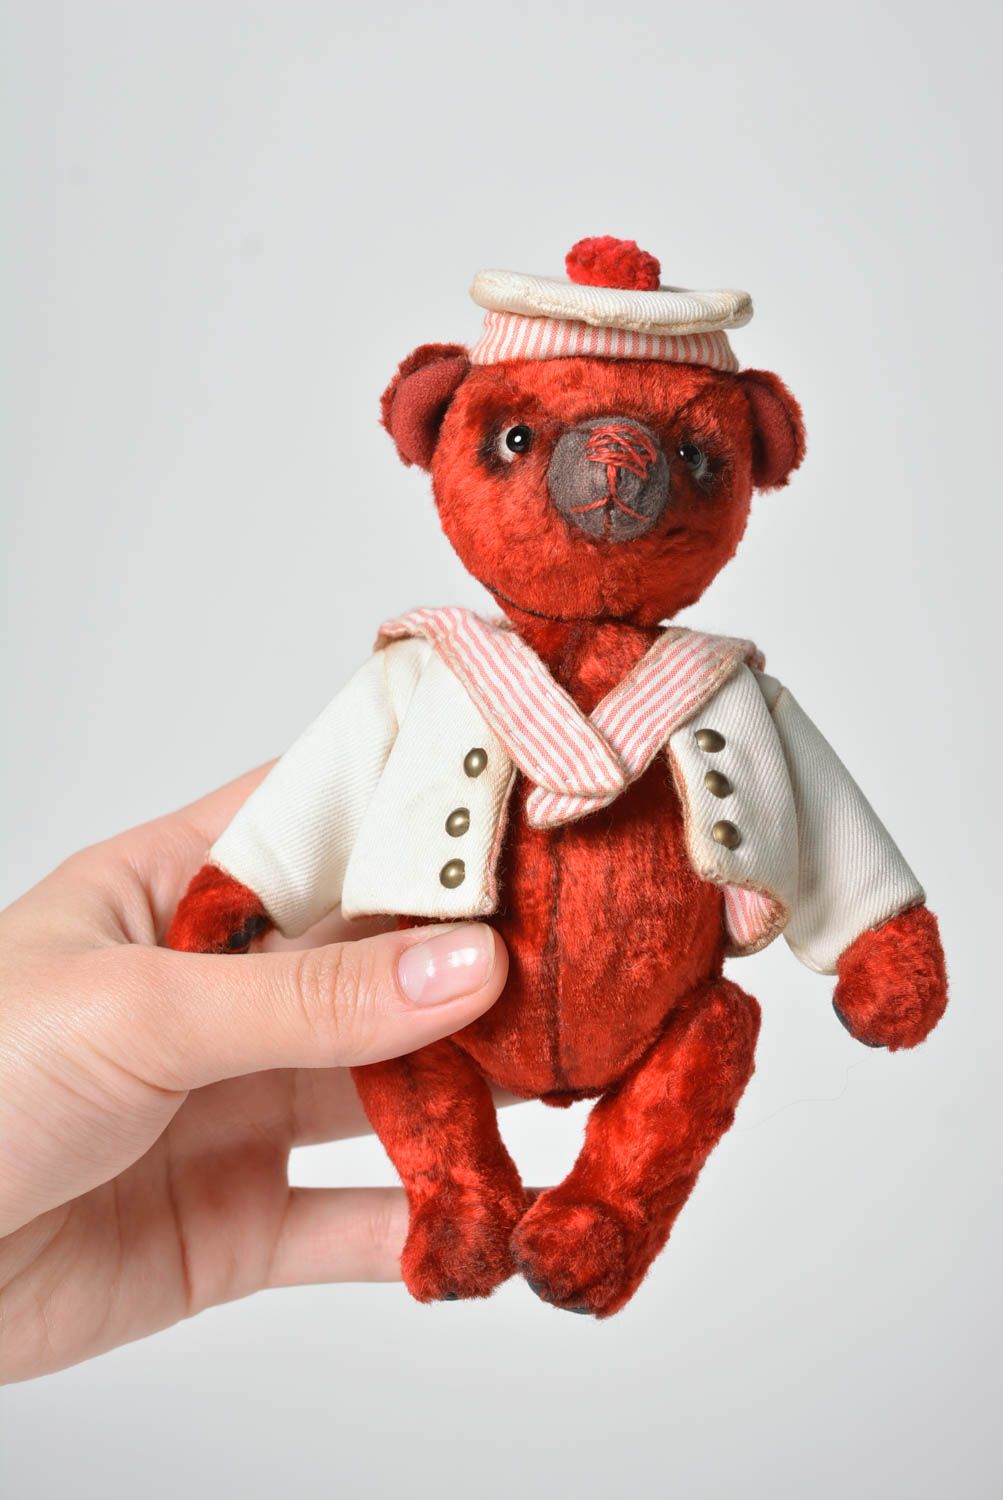 Handmade toy red teddy bear unusual gift animal toy baby toy stuffed toys photo 1